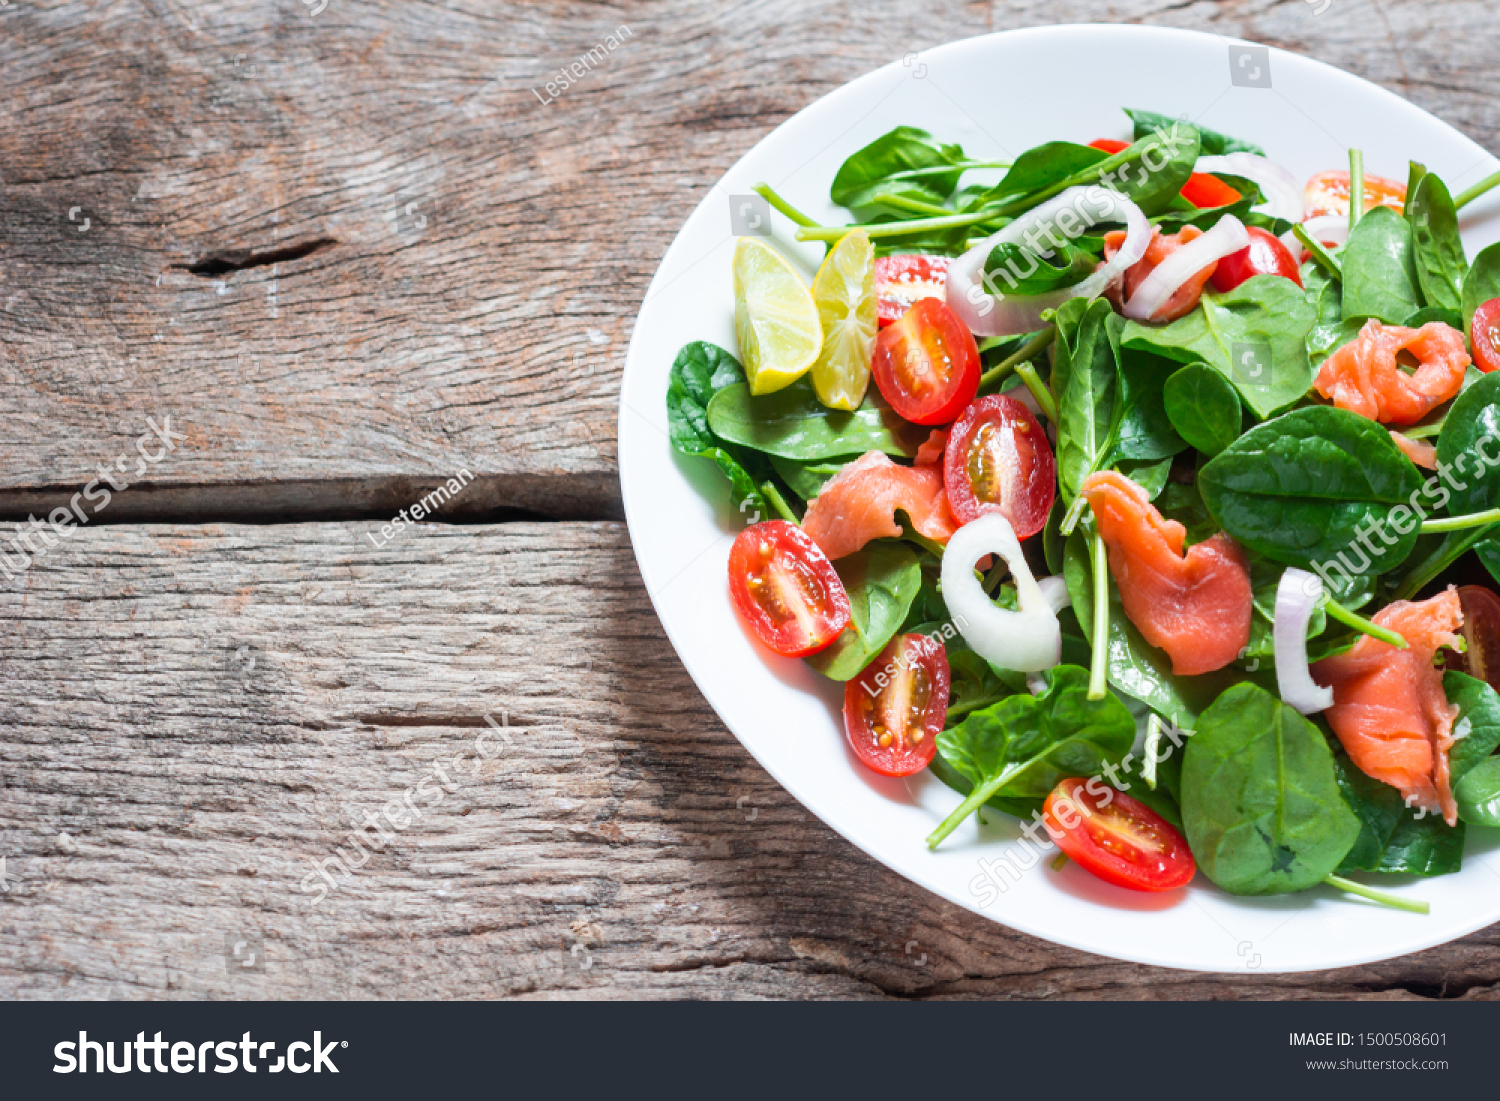 Selective focus Salmon Fresh green Salad with spinach, cherry tomatoes,baby spinach,  Concept for a tasty and healthy meal. Dark stone background. Top view. Close up. #1500508601